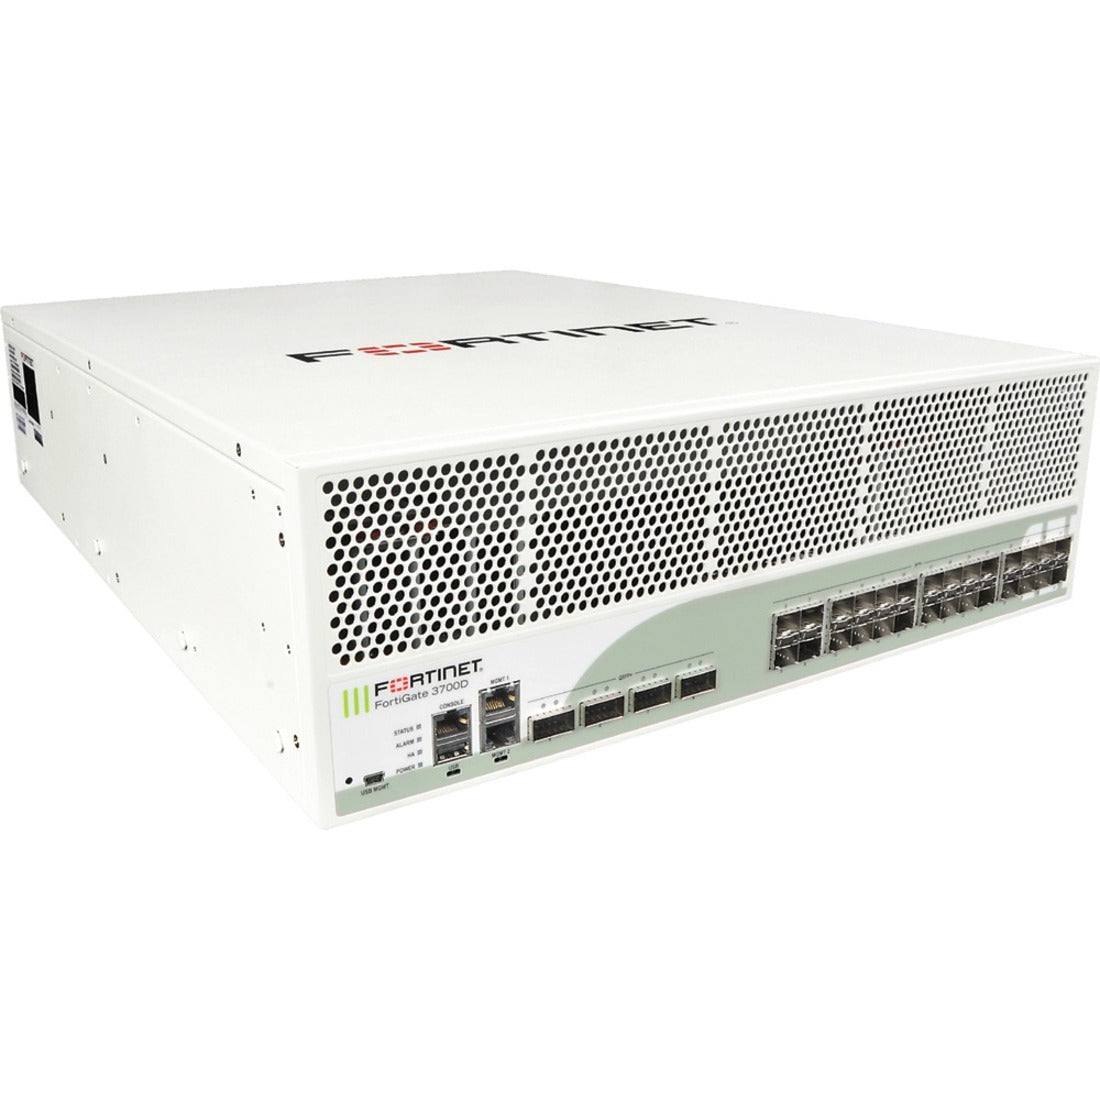 Fortinet FortiGate FG-3700D-DC Network Security/Firewall Appliance